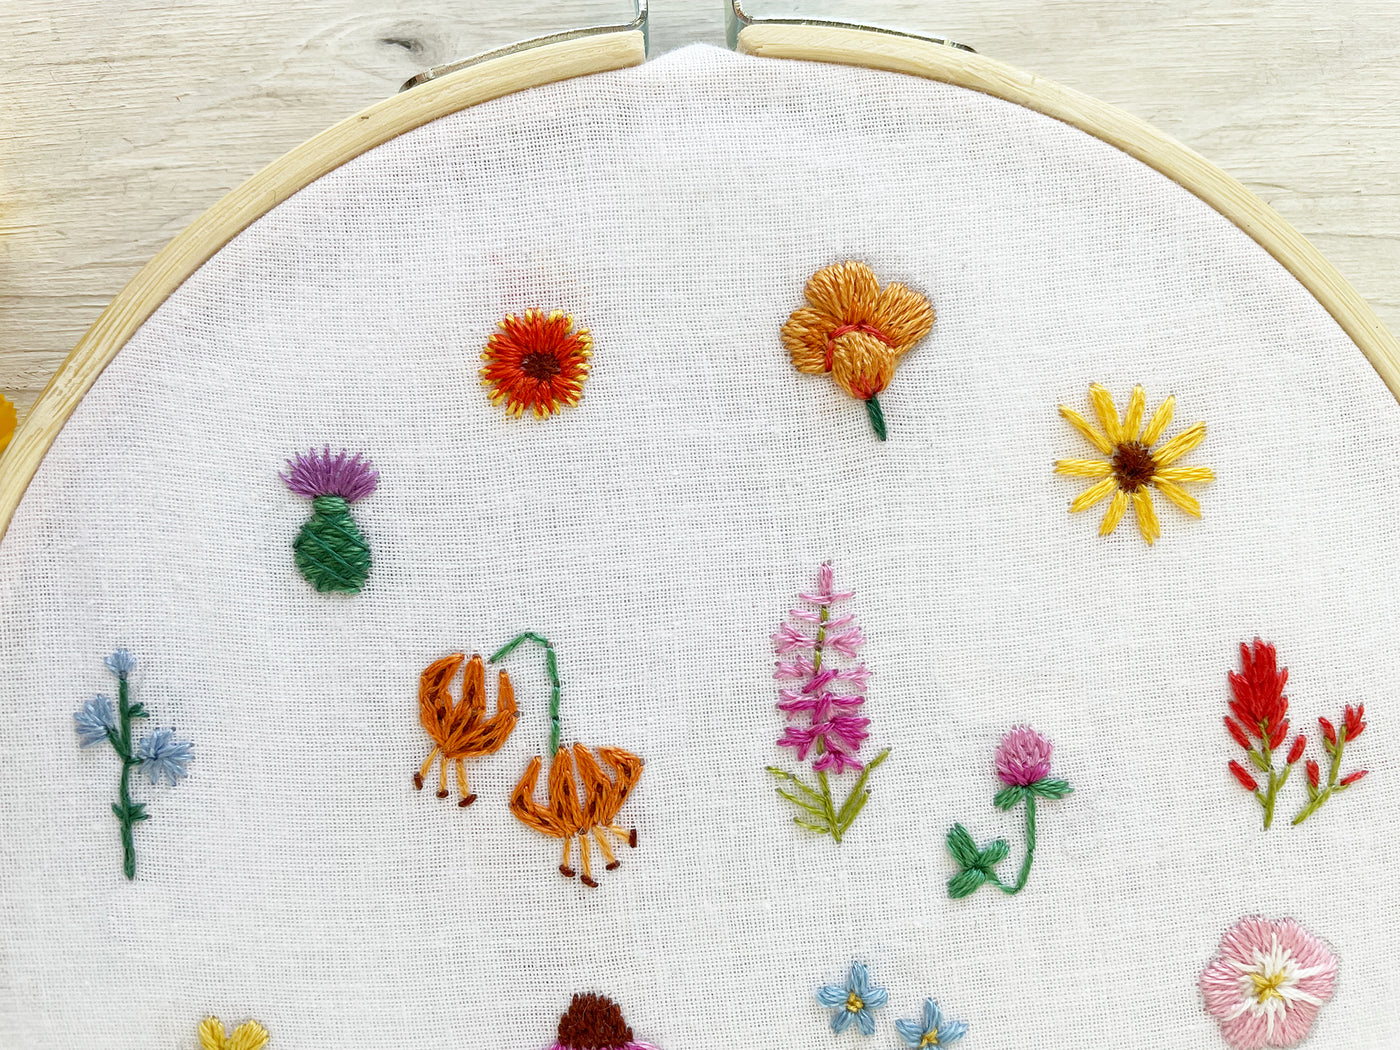 Tiny Wildflowers Hand Embroidery pattern download, mini floral design